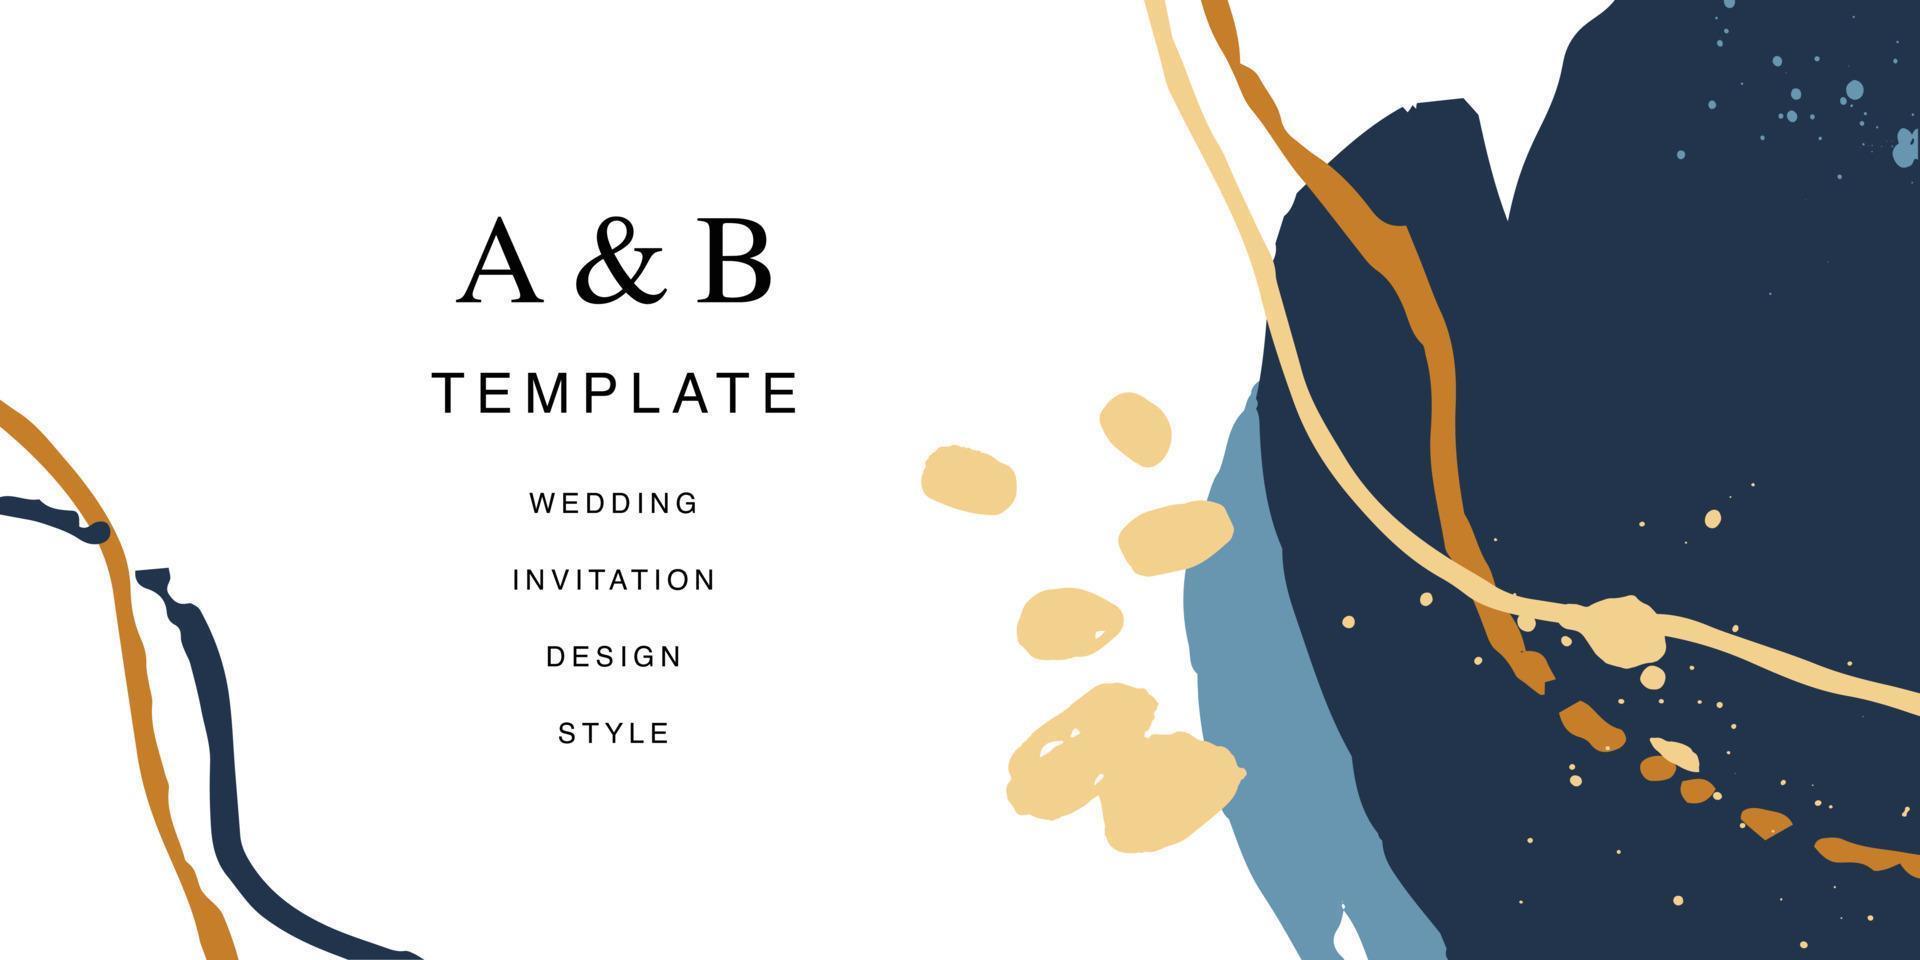 Minimalist design for wedding invitation card templates. Simple brush stroke backgrounds in vintage themes for greeting cards. Premium and elegance design graphic vector